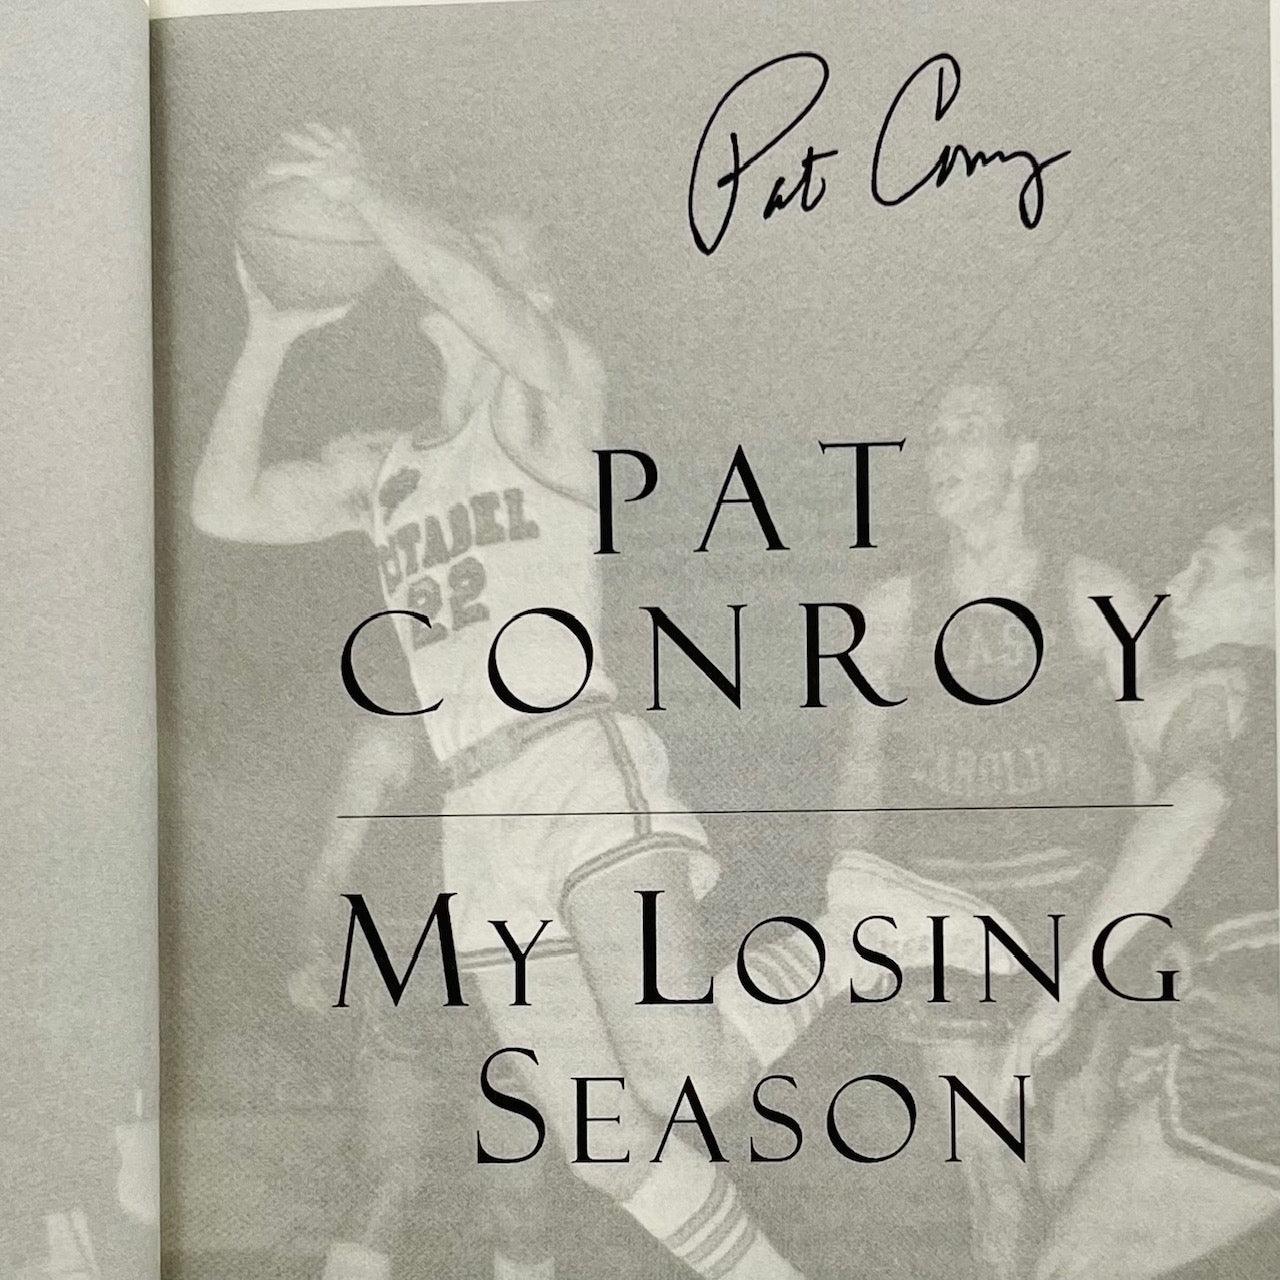 My Losing Season (signed by Pat Conroy) - Grinning Cat Books - AMERICAN LITERATURE - PAT CONROY, SIGNED